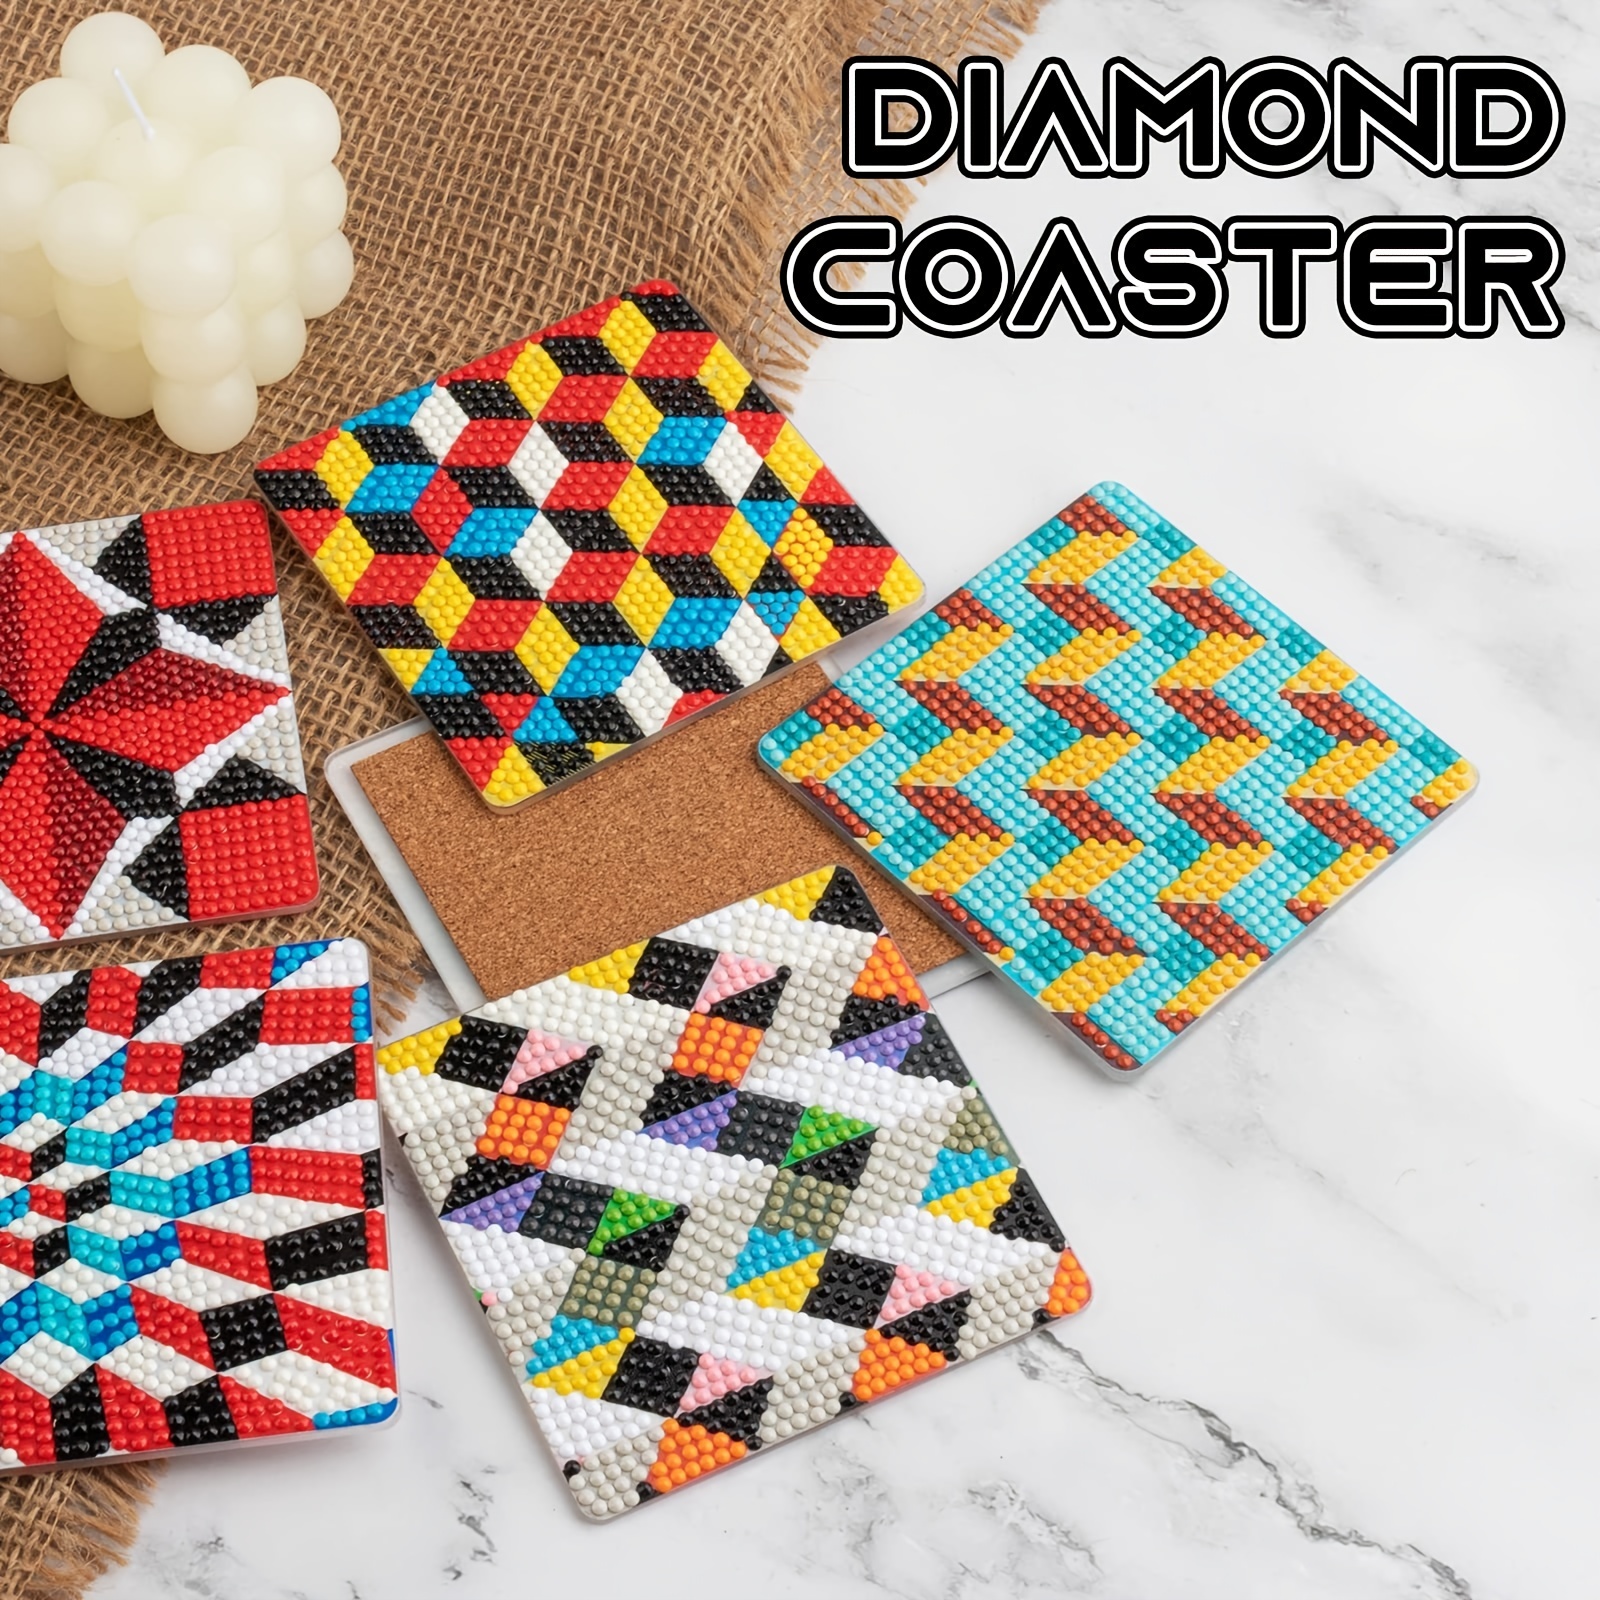 Gorware 6pcs Diamond Painting Coasters with Dimensional Holder DIY Cat Coaster Non-Slip Kids and Adults Art Craft Supplies